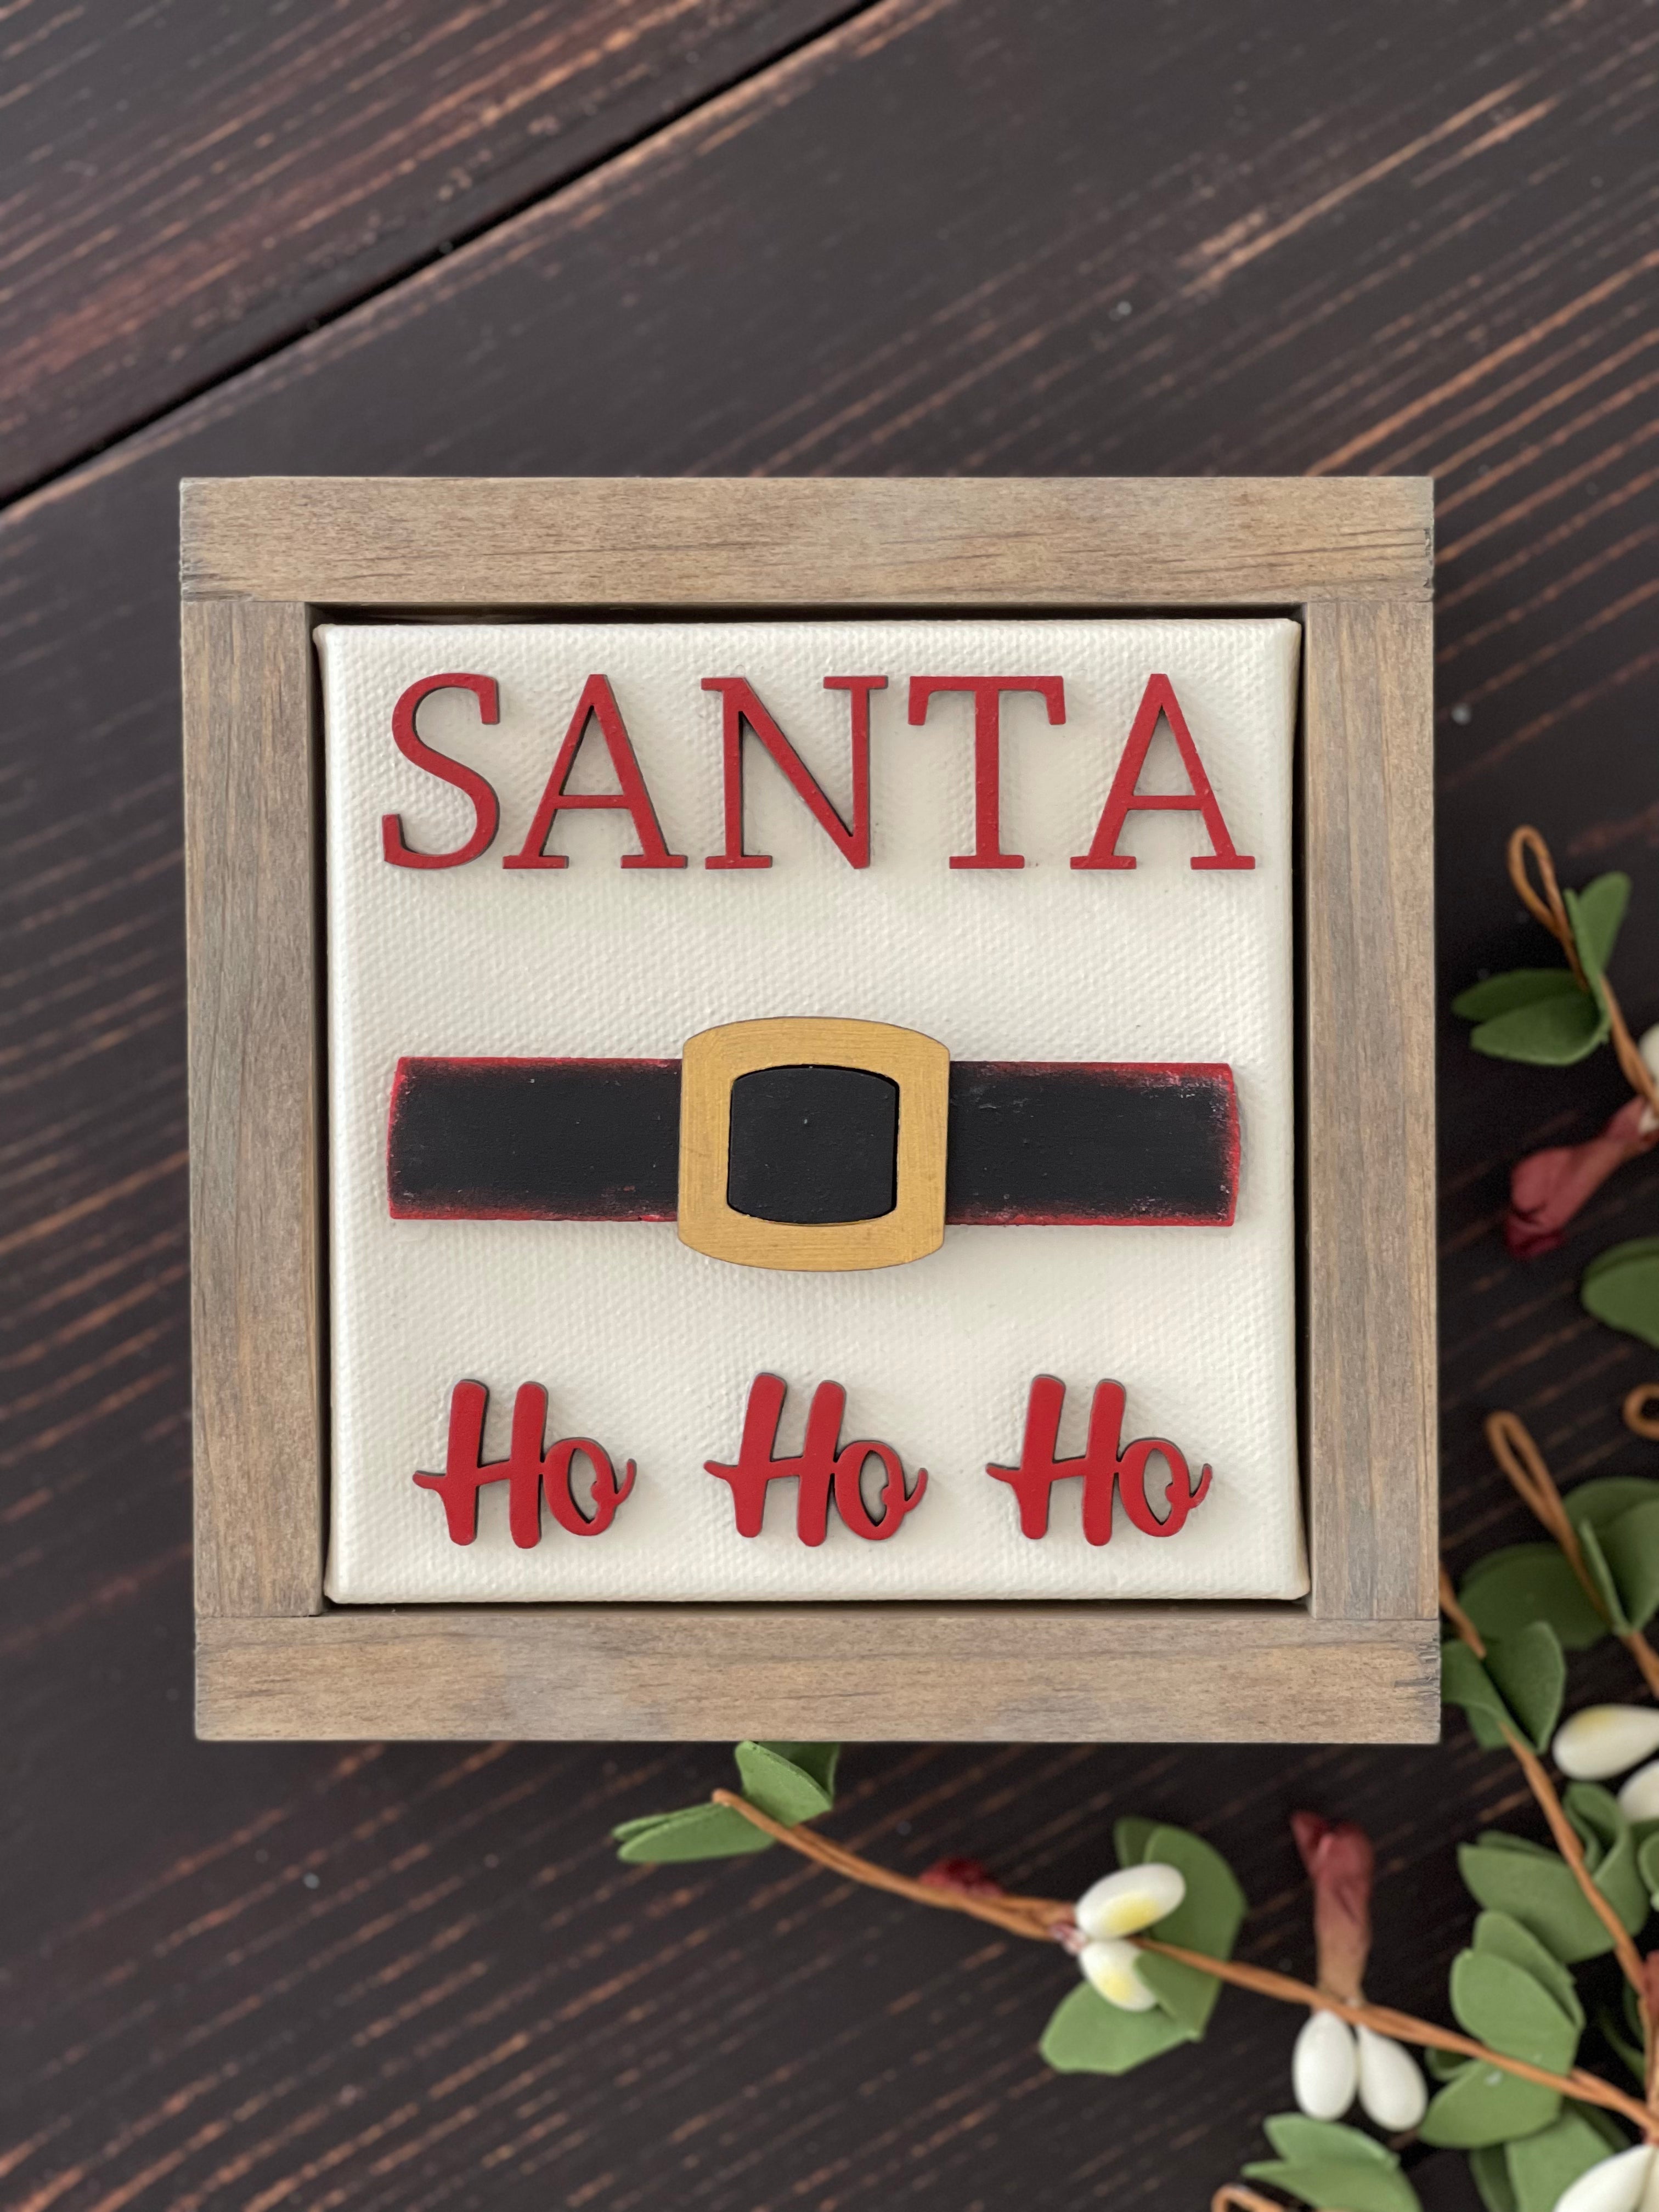 This image shows the santa sign with wood cutouts and a wood stained frame.